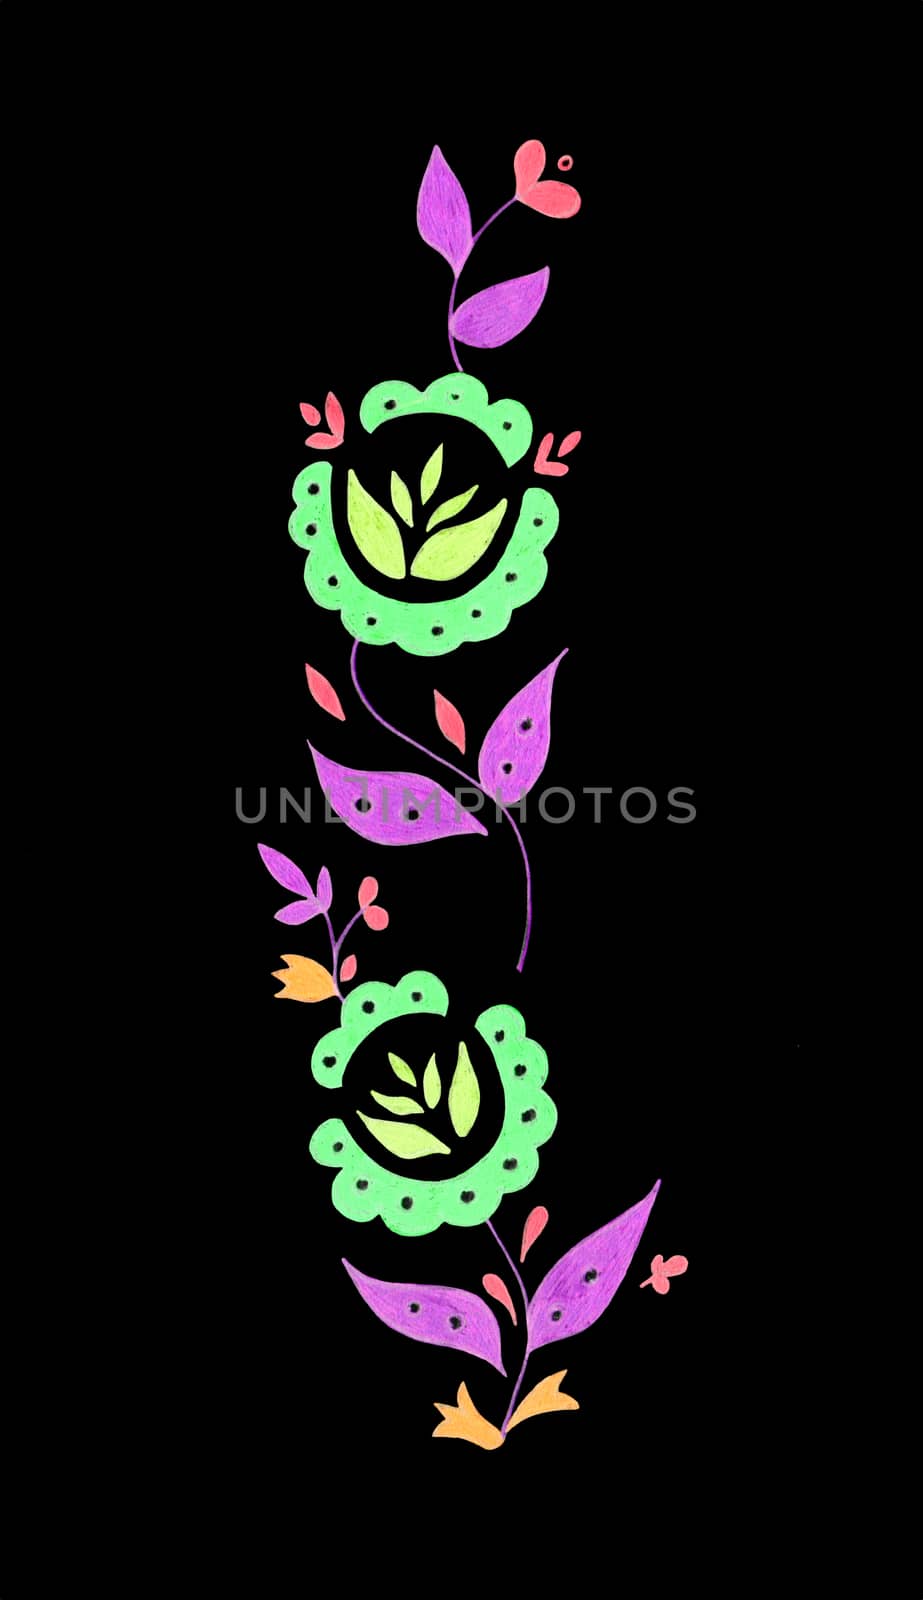 Decorative composition of abstract doodle flowers and leaves. Floral motif illustration. Design element. Hand drawn vertical ornament isolated on white background. by sshisshka